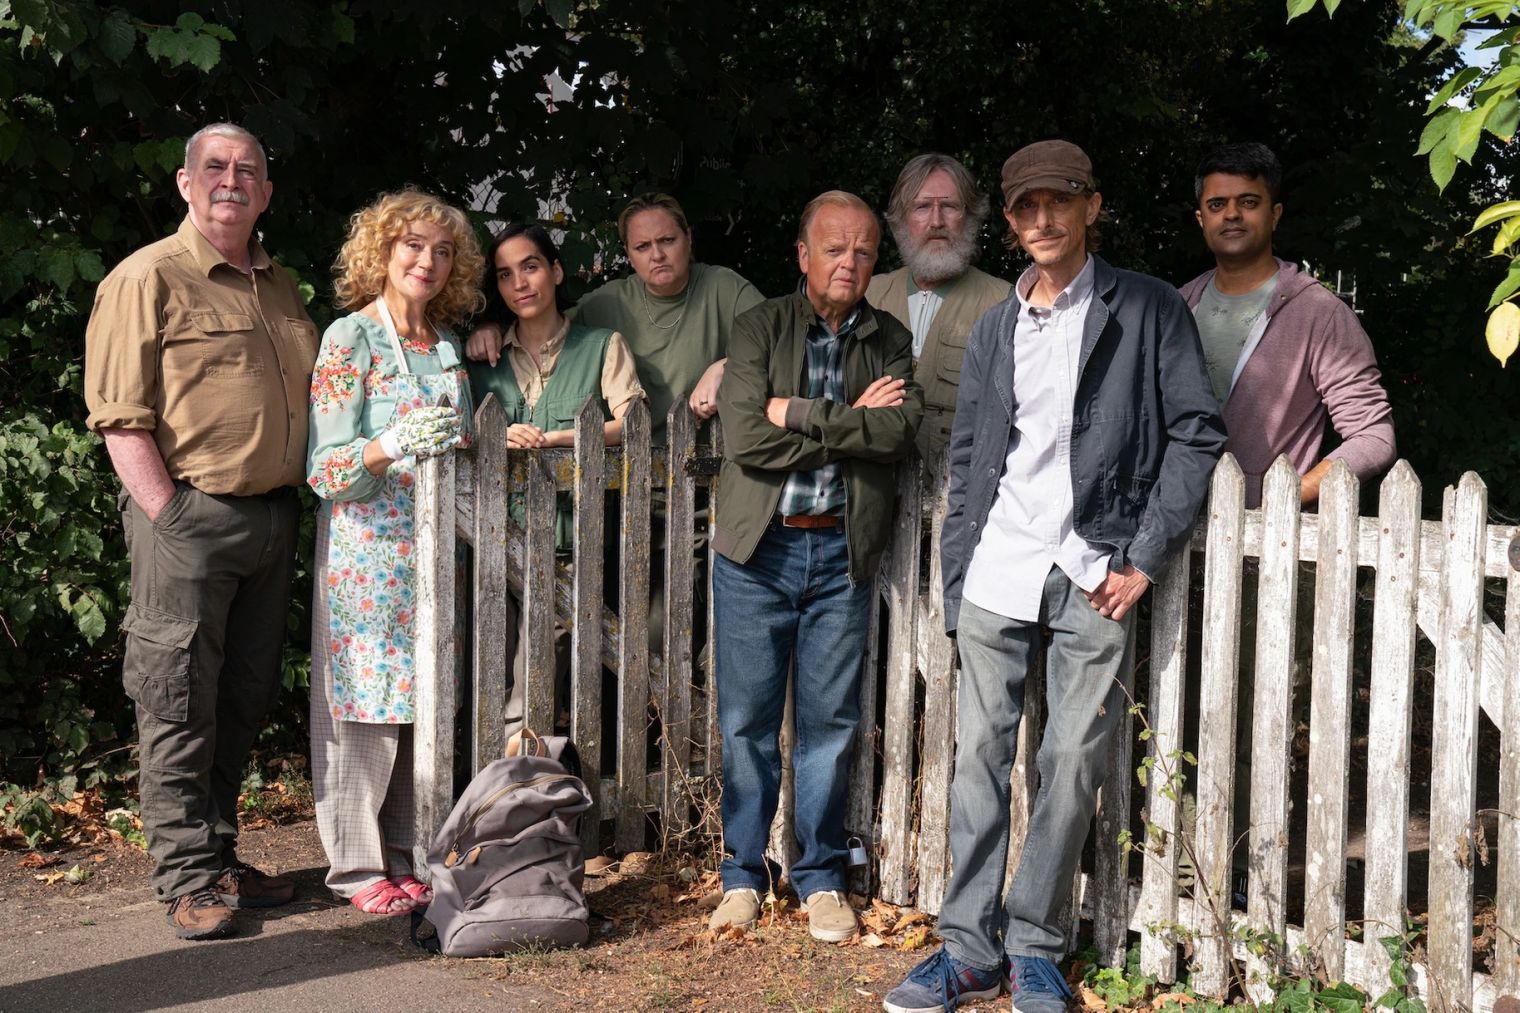 The BAFTA winning Detectorists returns to the BBC in a one off Christmas special on Boxing Day 